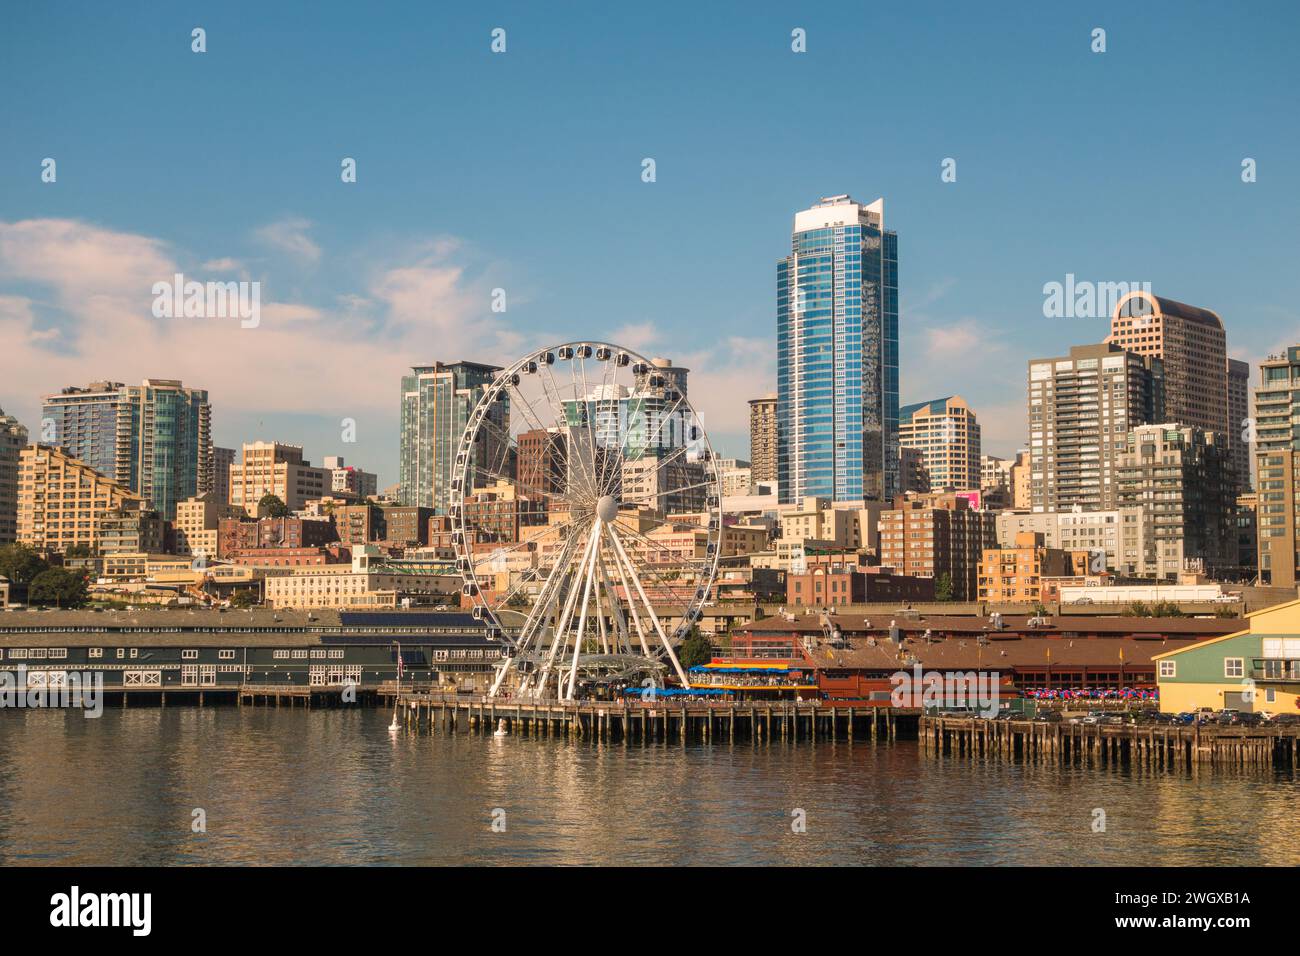 Seattle skyline with Waterfront neighborhood and ferris wheel in foreground. Stock Photo